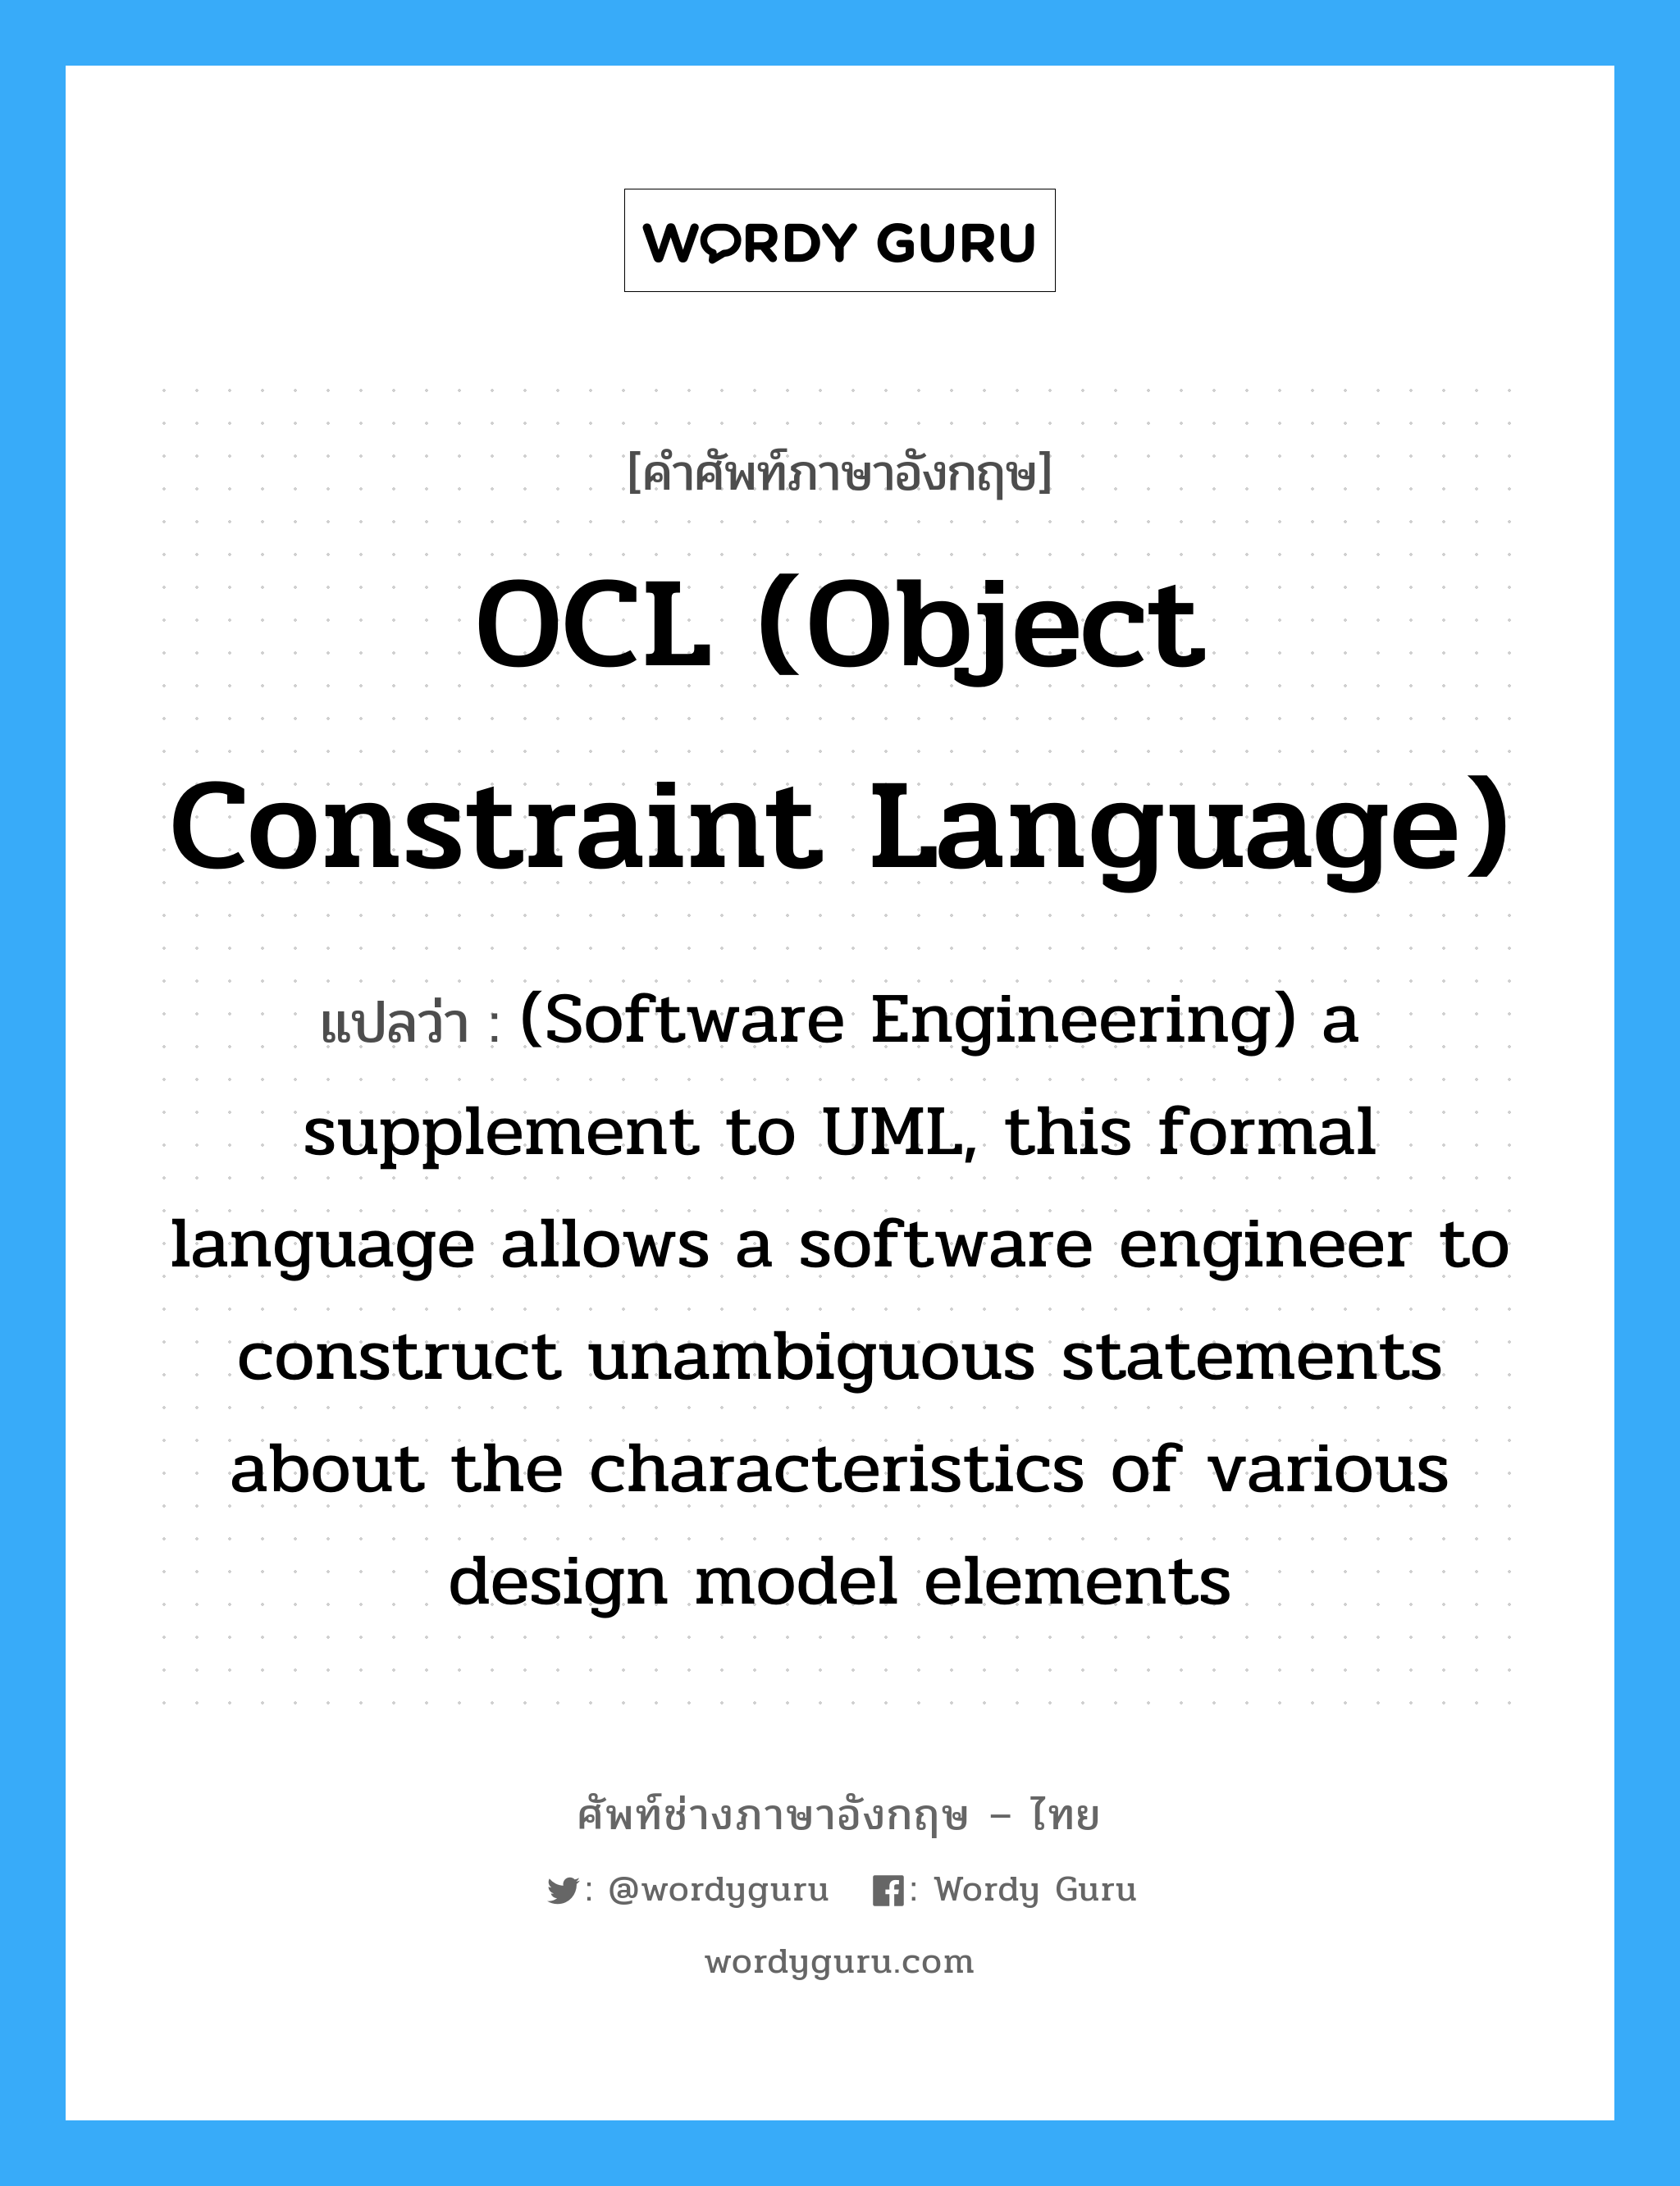 OCL (Object Constraint Language) แปลว่า?, คำศัพท์ช่างภาษาอังกฤษ - ไทย OCL (Object Constraint Language) คำศัพท์ภาษาอังกฤษ OCL (Object Constraint Language) แปลว่า (Software Engineering) a supplement to UML, this formal language allows a software engineer to construct unambiguous statements about the characteristics of various design model elements